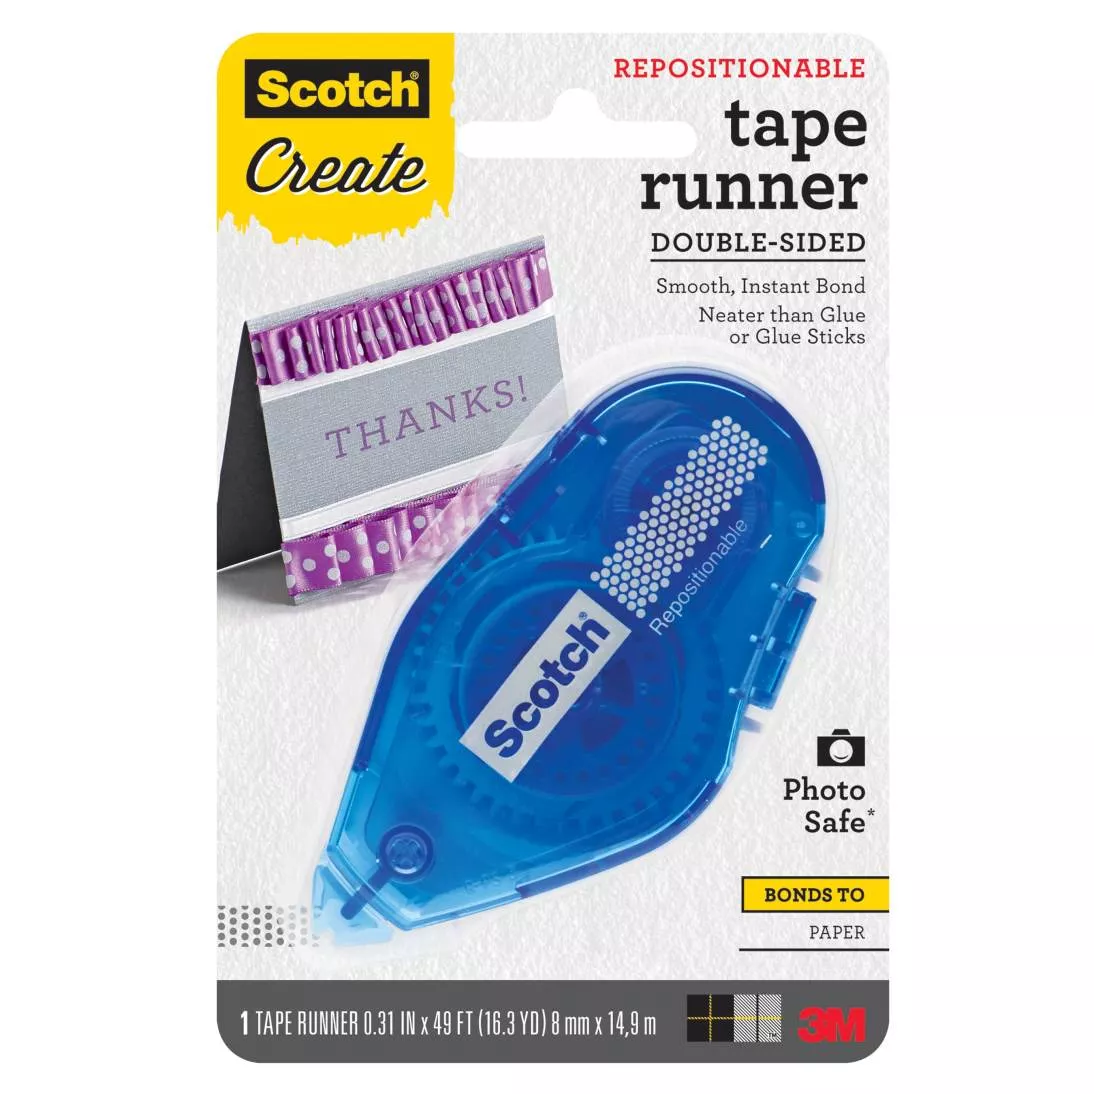 Scotch® Tape Runner Repositionable 055-RPS-CFT, .31 in x 49 ft